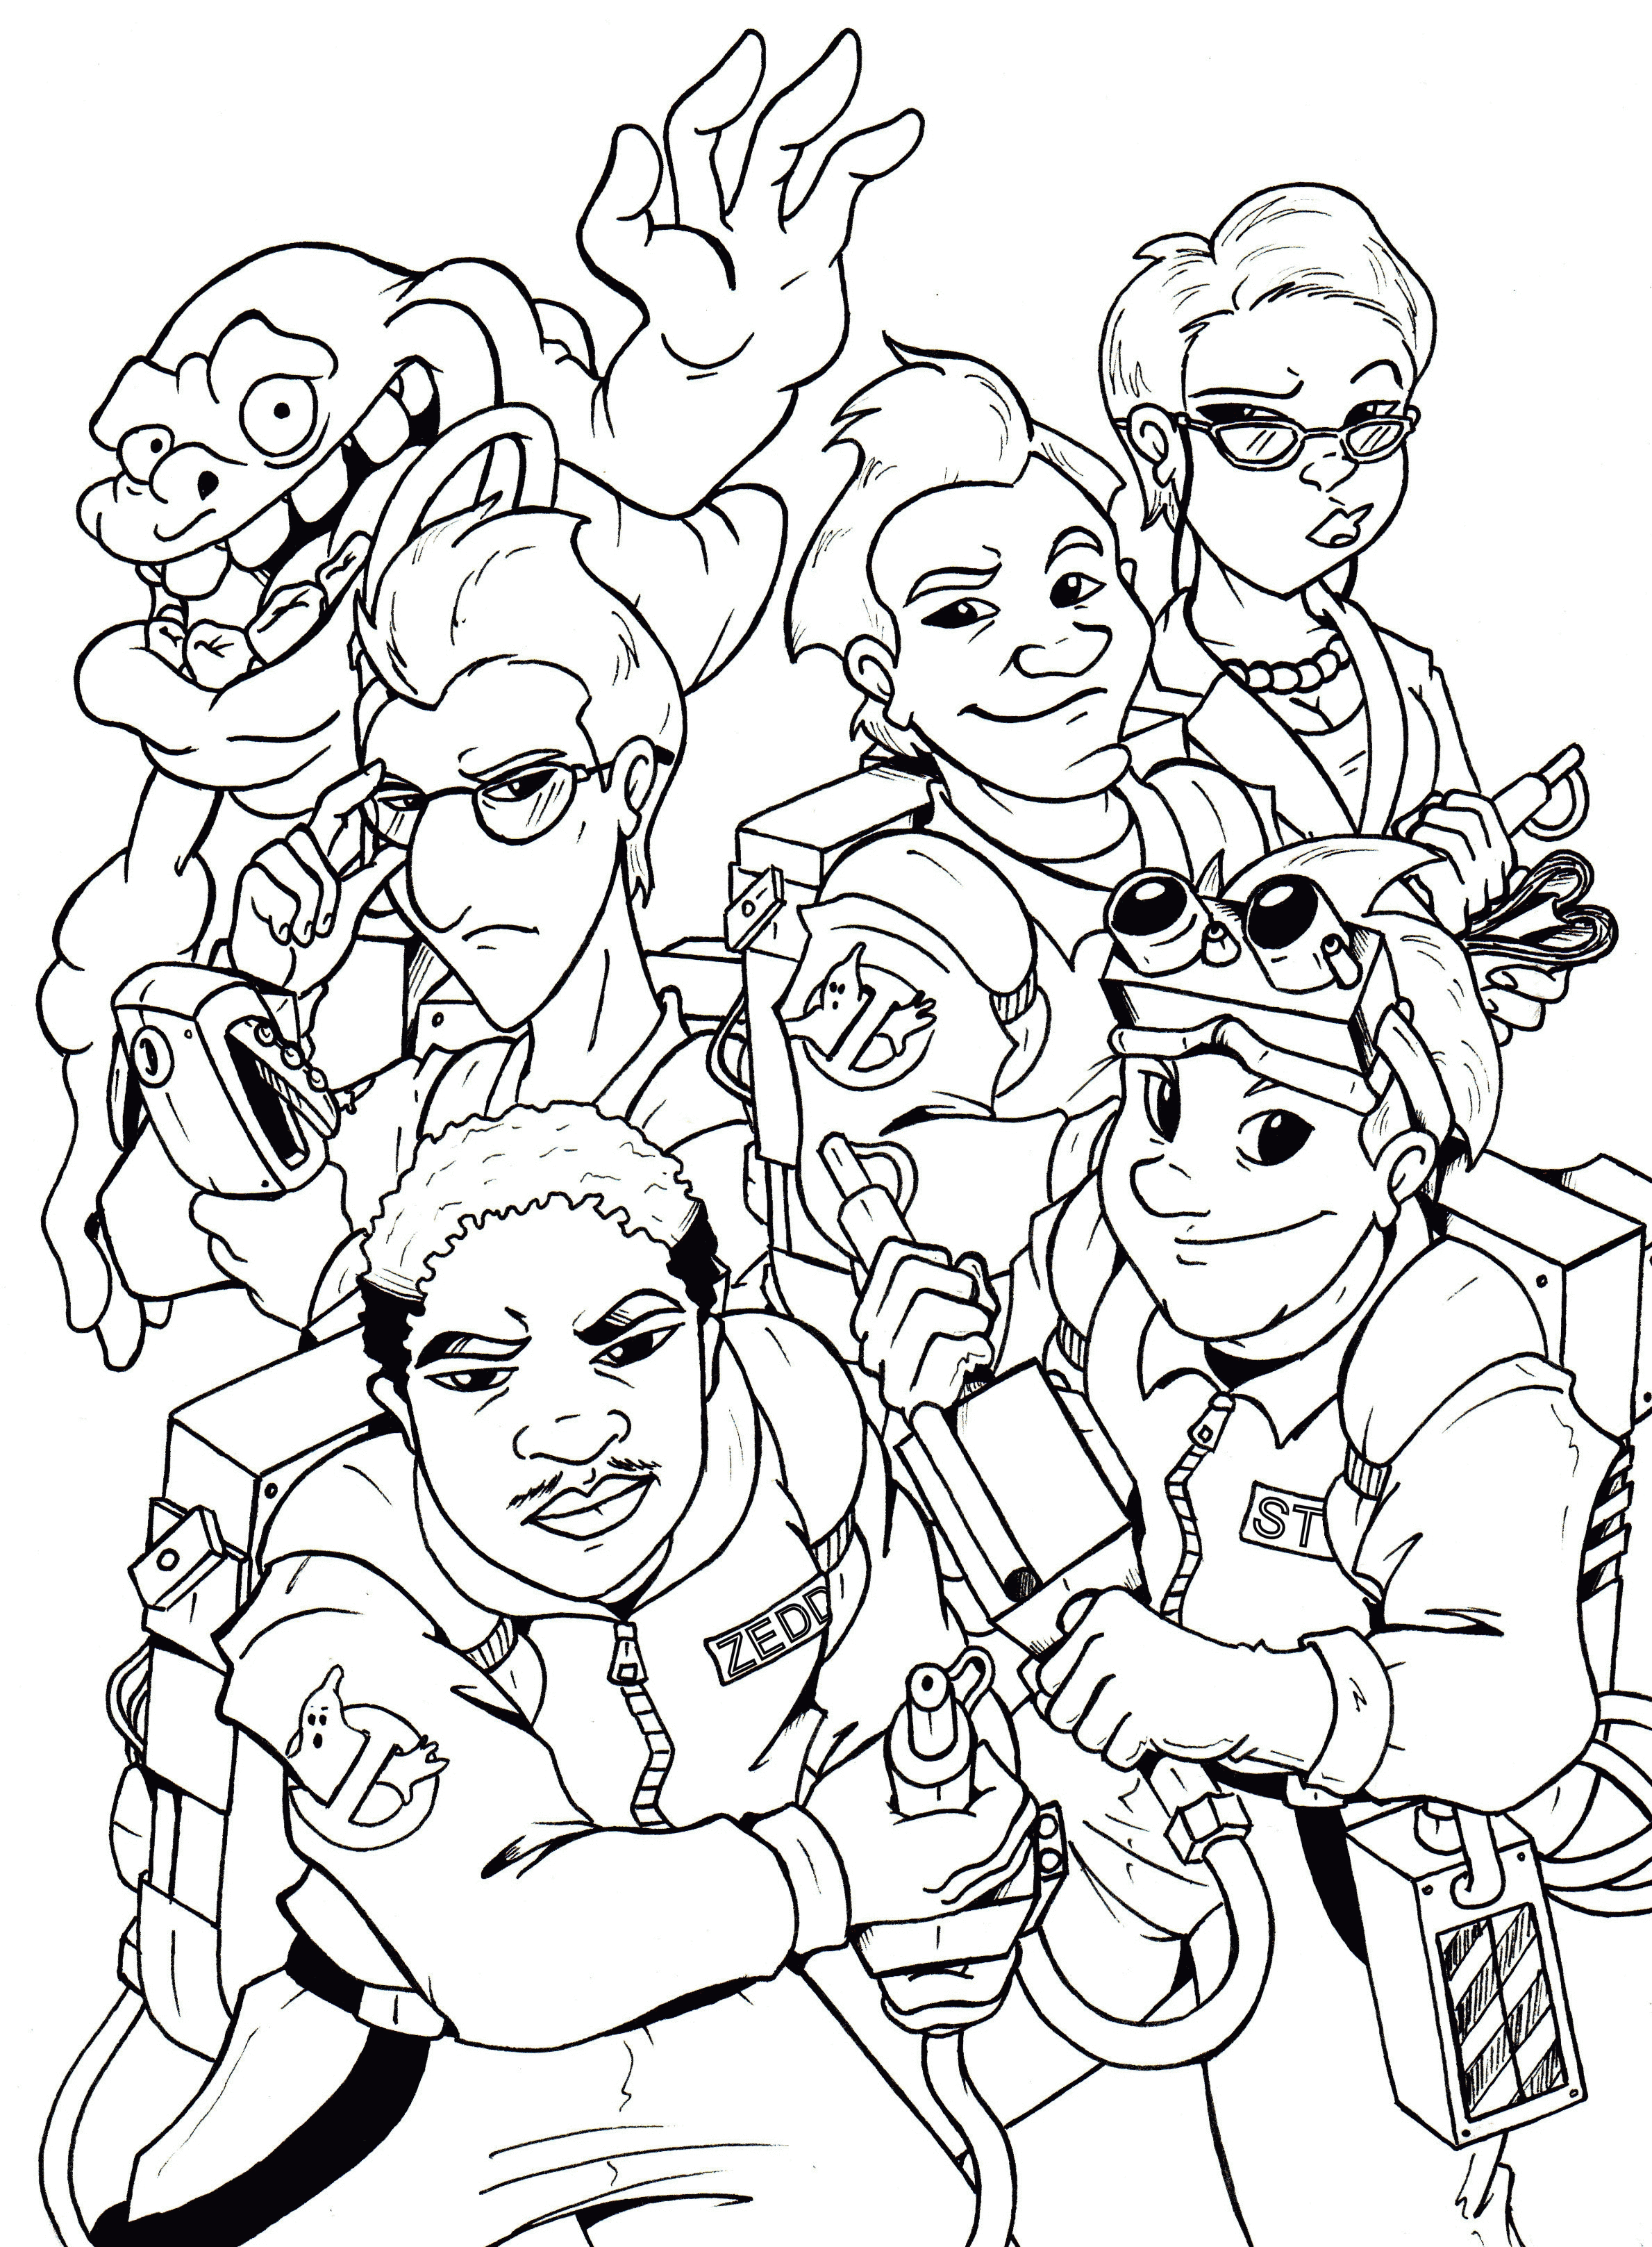 Ghostbusters Coloring Pages Ghostbusters 3 Coloring Pages. Kids ...